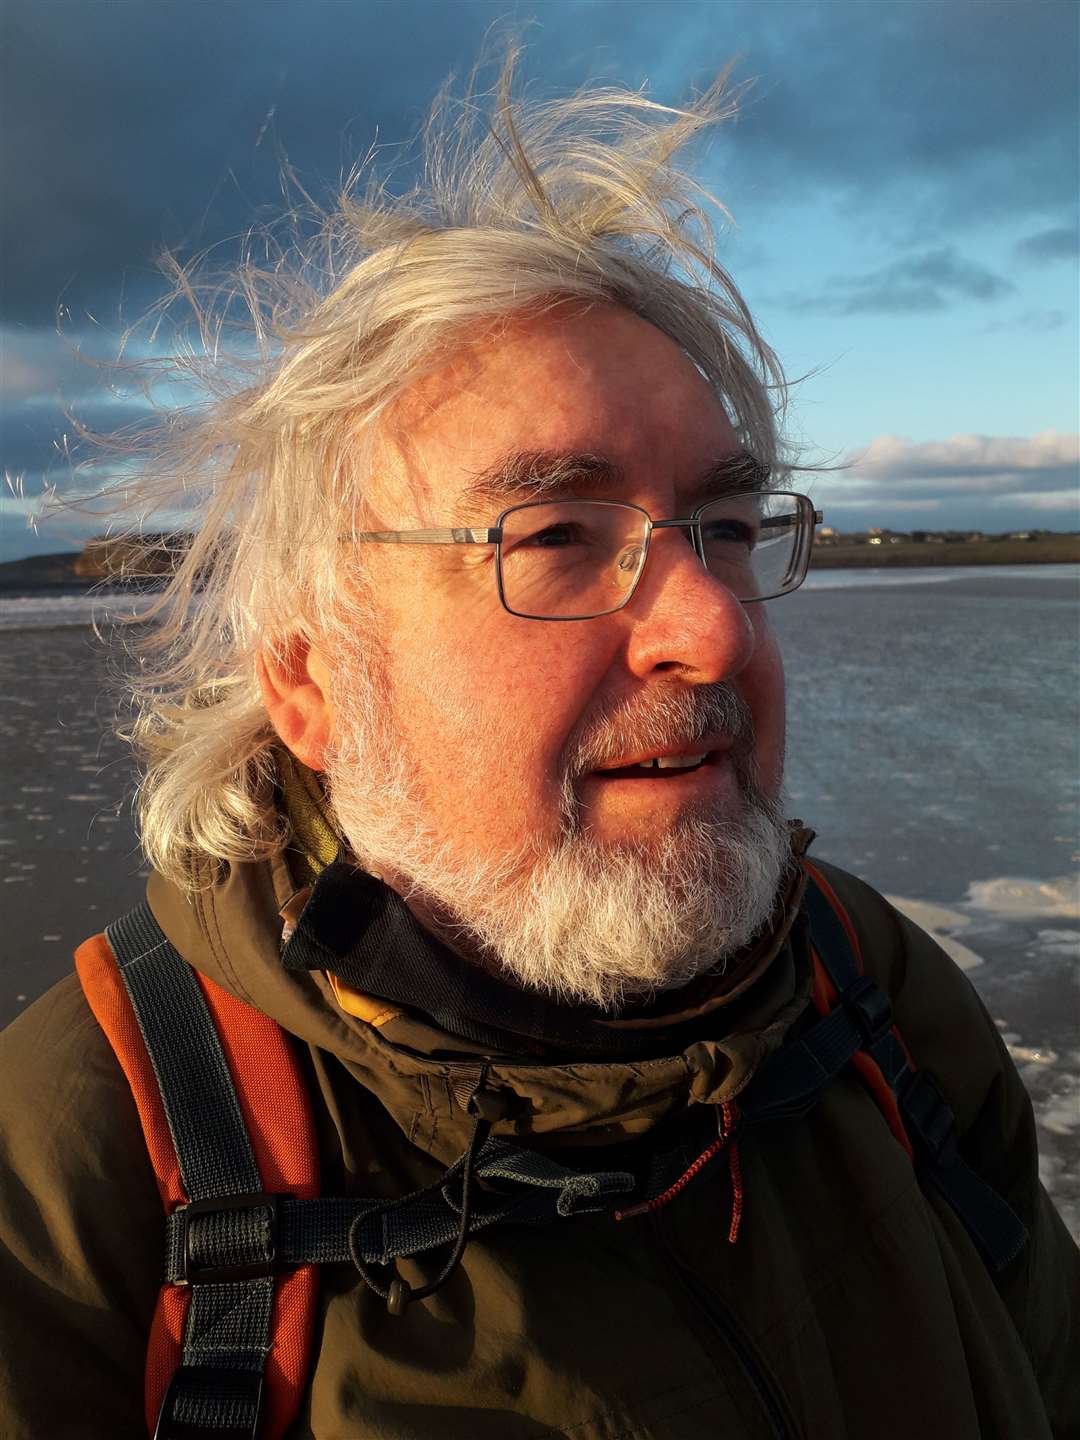 Poet and playwright George Gunn will take on the title of Caithness Makar and will be developing a community poem.